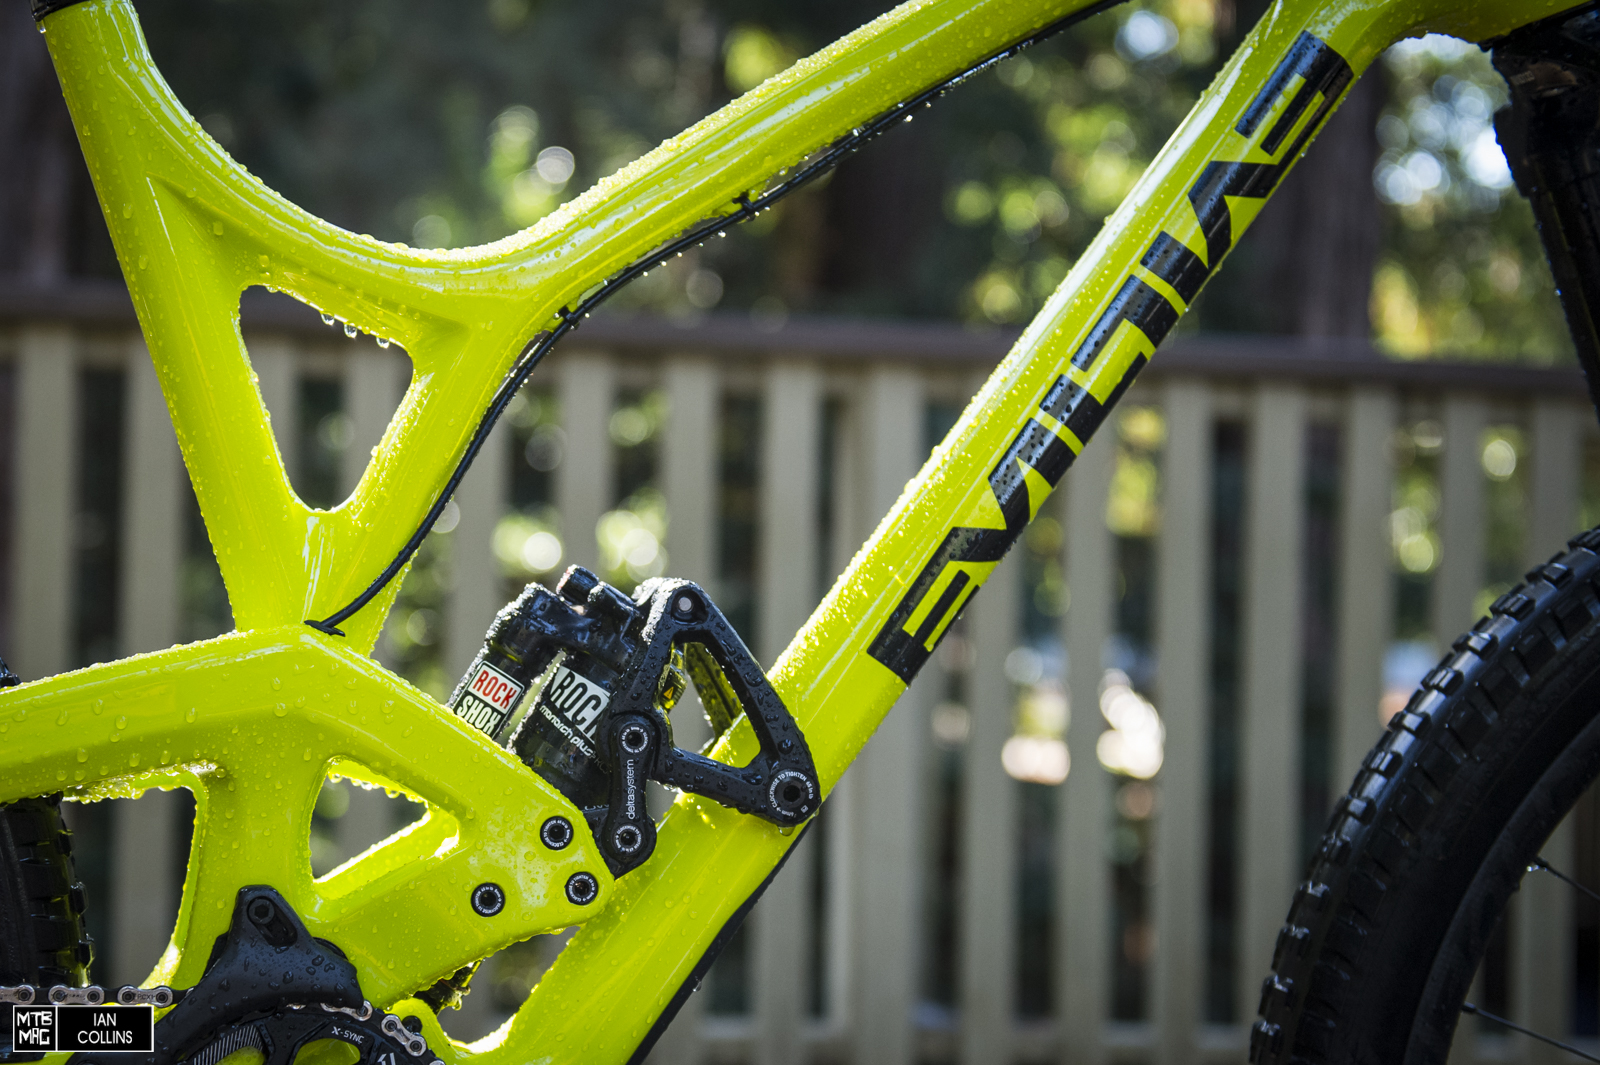 Delta System - the heart of it all. One of, if not the only suspension system that allows you to adjust your geometry without affecting your suspension. A RockShox Monarch Plus Debonair compliments the Insurgents progressive rate wonderfully.